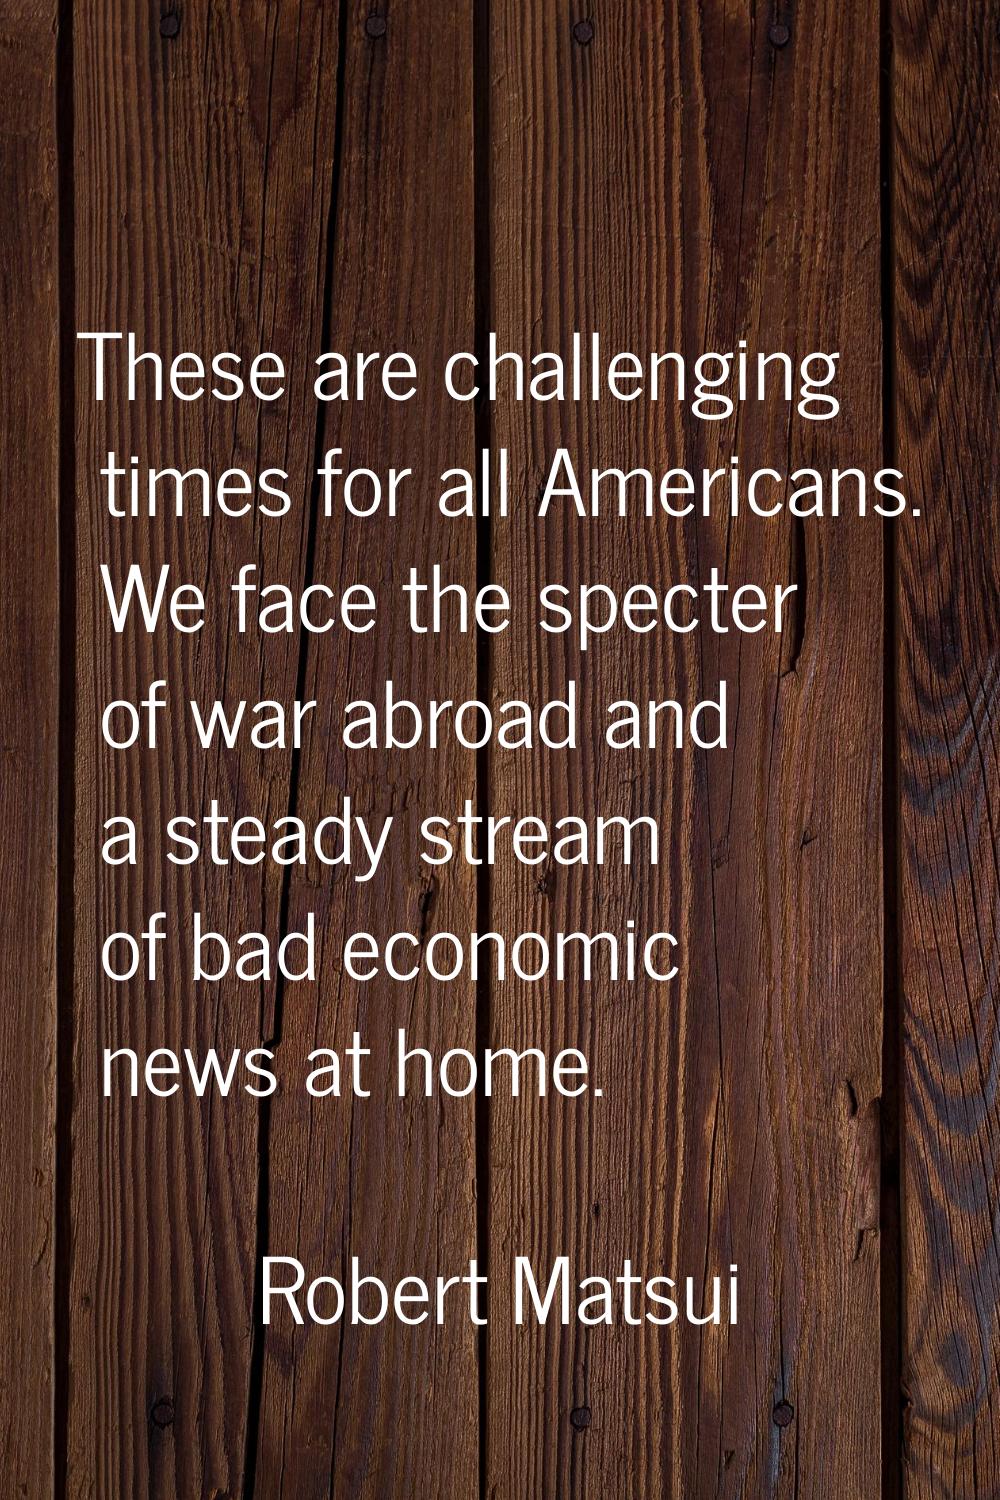 These are challenging times for all Americans. We face the specter of war abroad and a steady strea